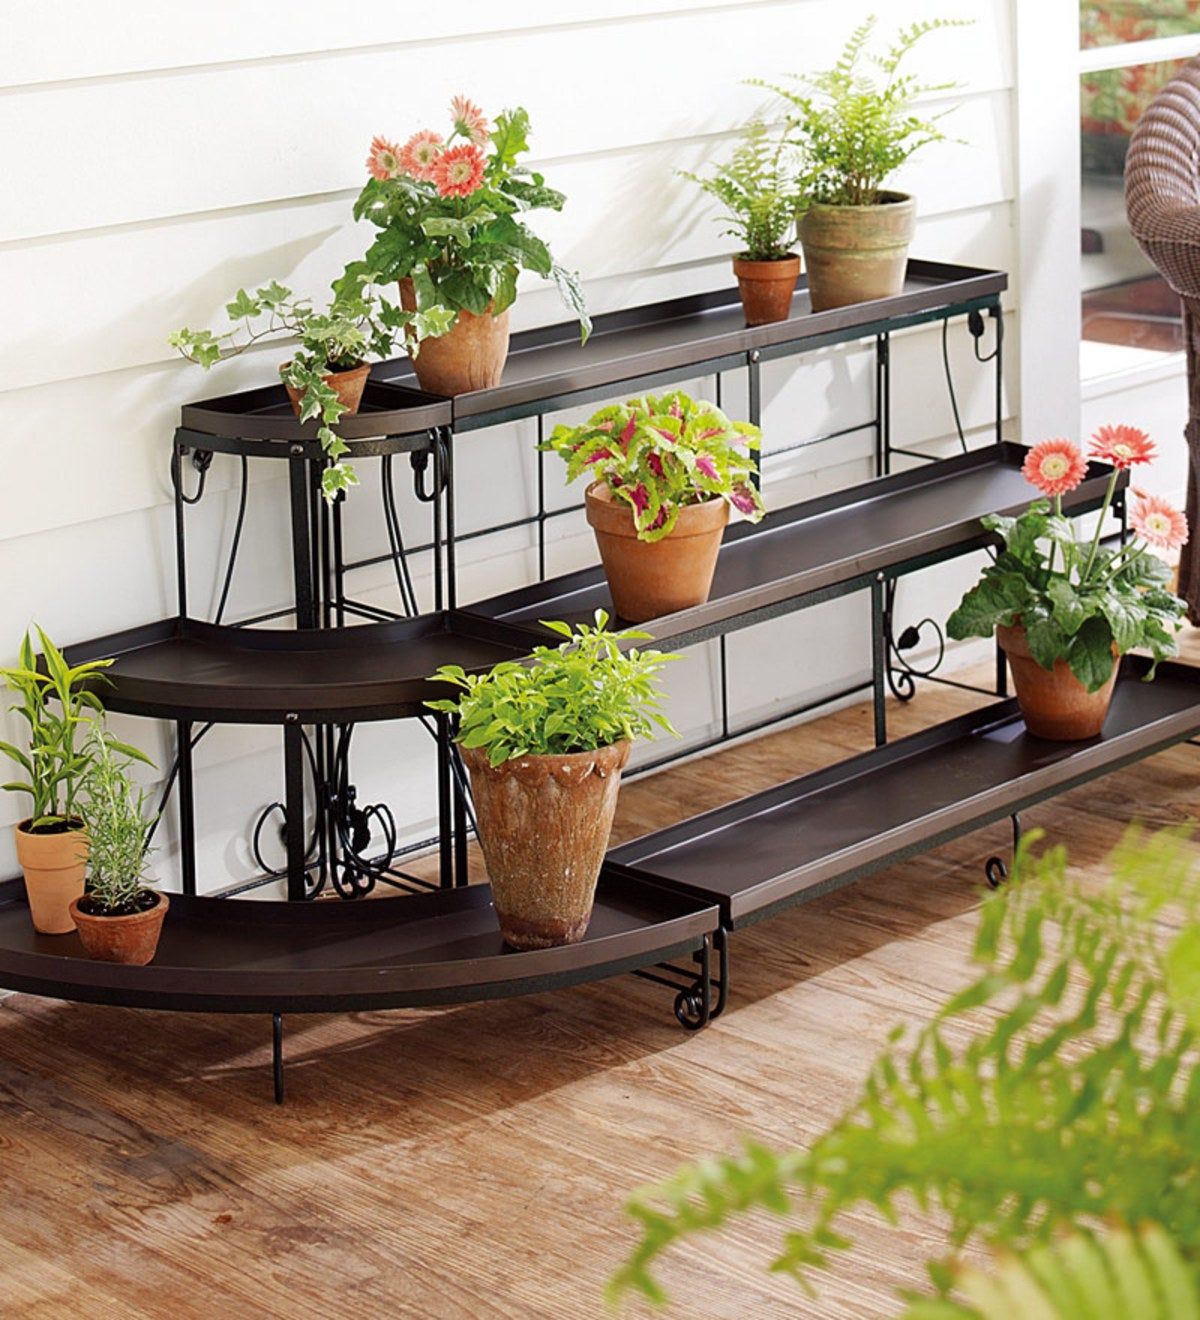 Three Tier Embellished Steel Plant Stand Set | Plowhearth Within Three Tiered Plant Stands (View 2 of 15)